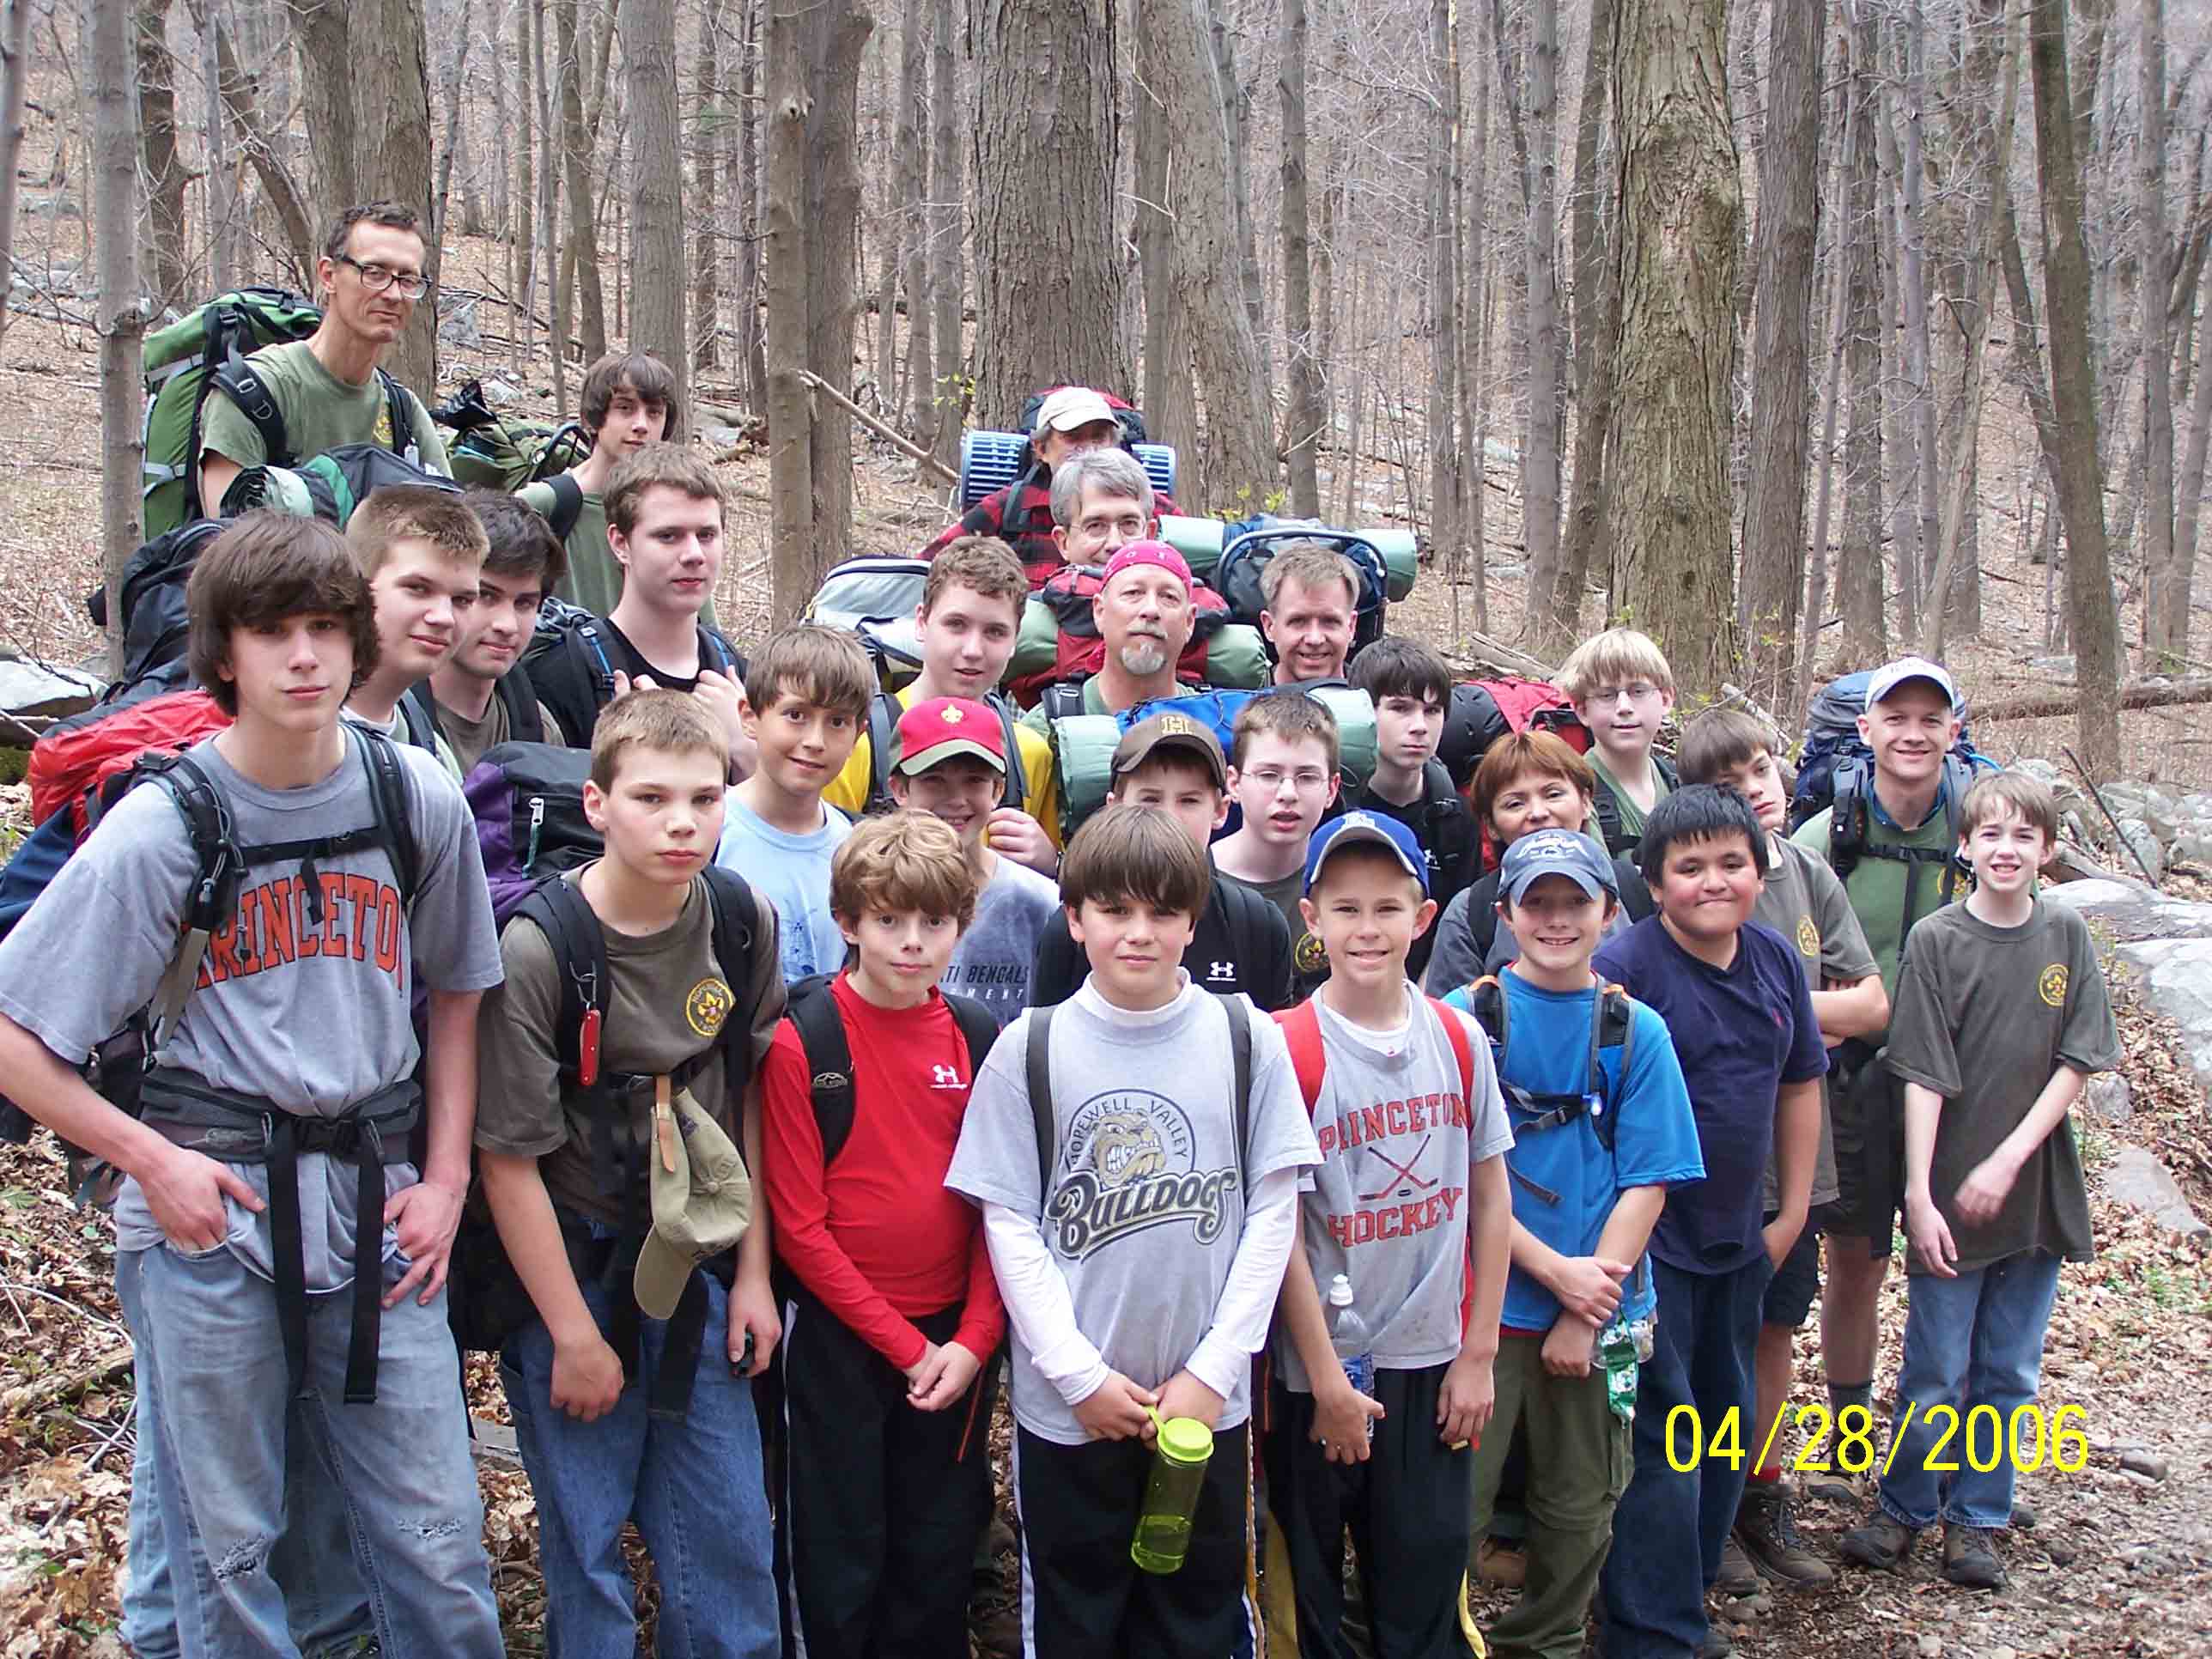 Troop 71 from NJ. Sorry wrong year on picture - it should be 2007. Courtesy at@rohland.org